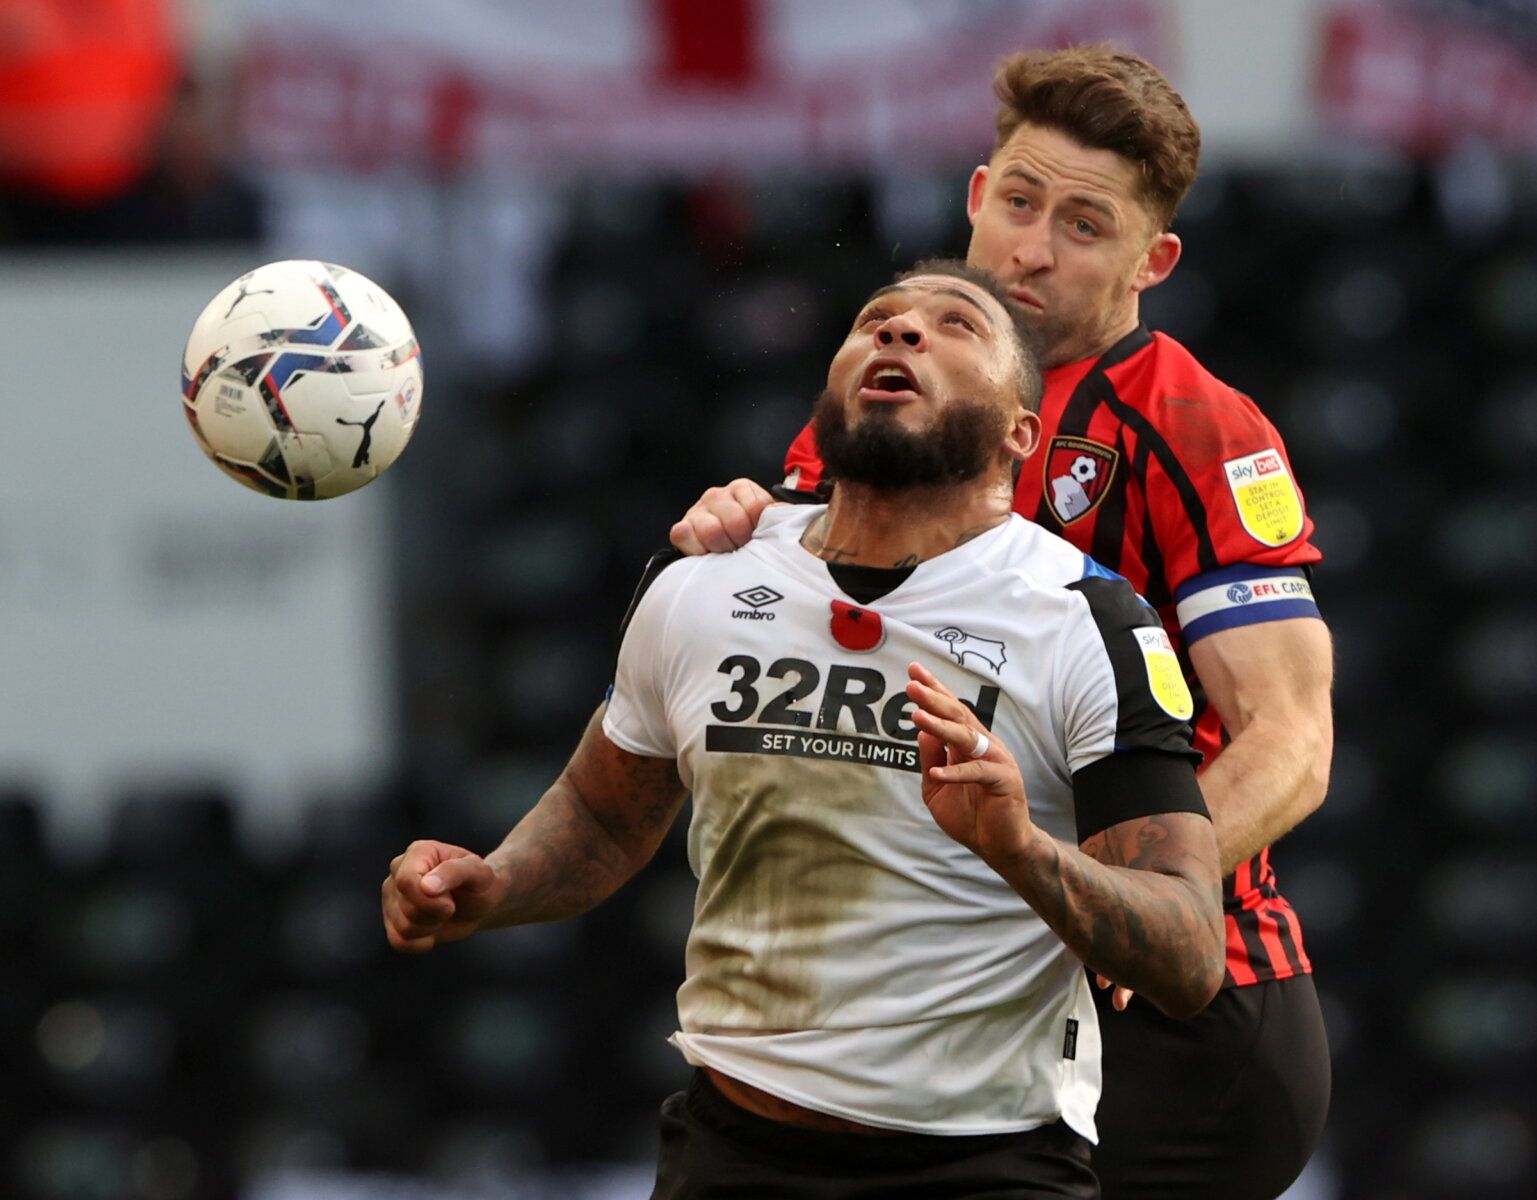 Soccer Football - Championship - Derby County v AFC Bournemouth - Pride Park, Derby, Britain - November 21, 2021 Derby County's Colin Kazim-Richards in action with Bournemouth's Gary Cahill  Molly Darlington/Action Images